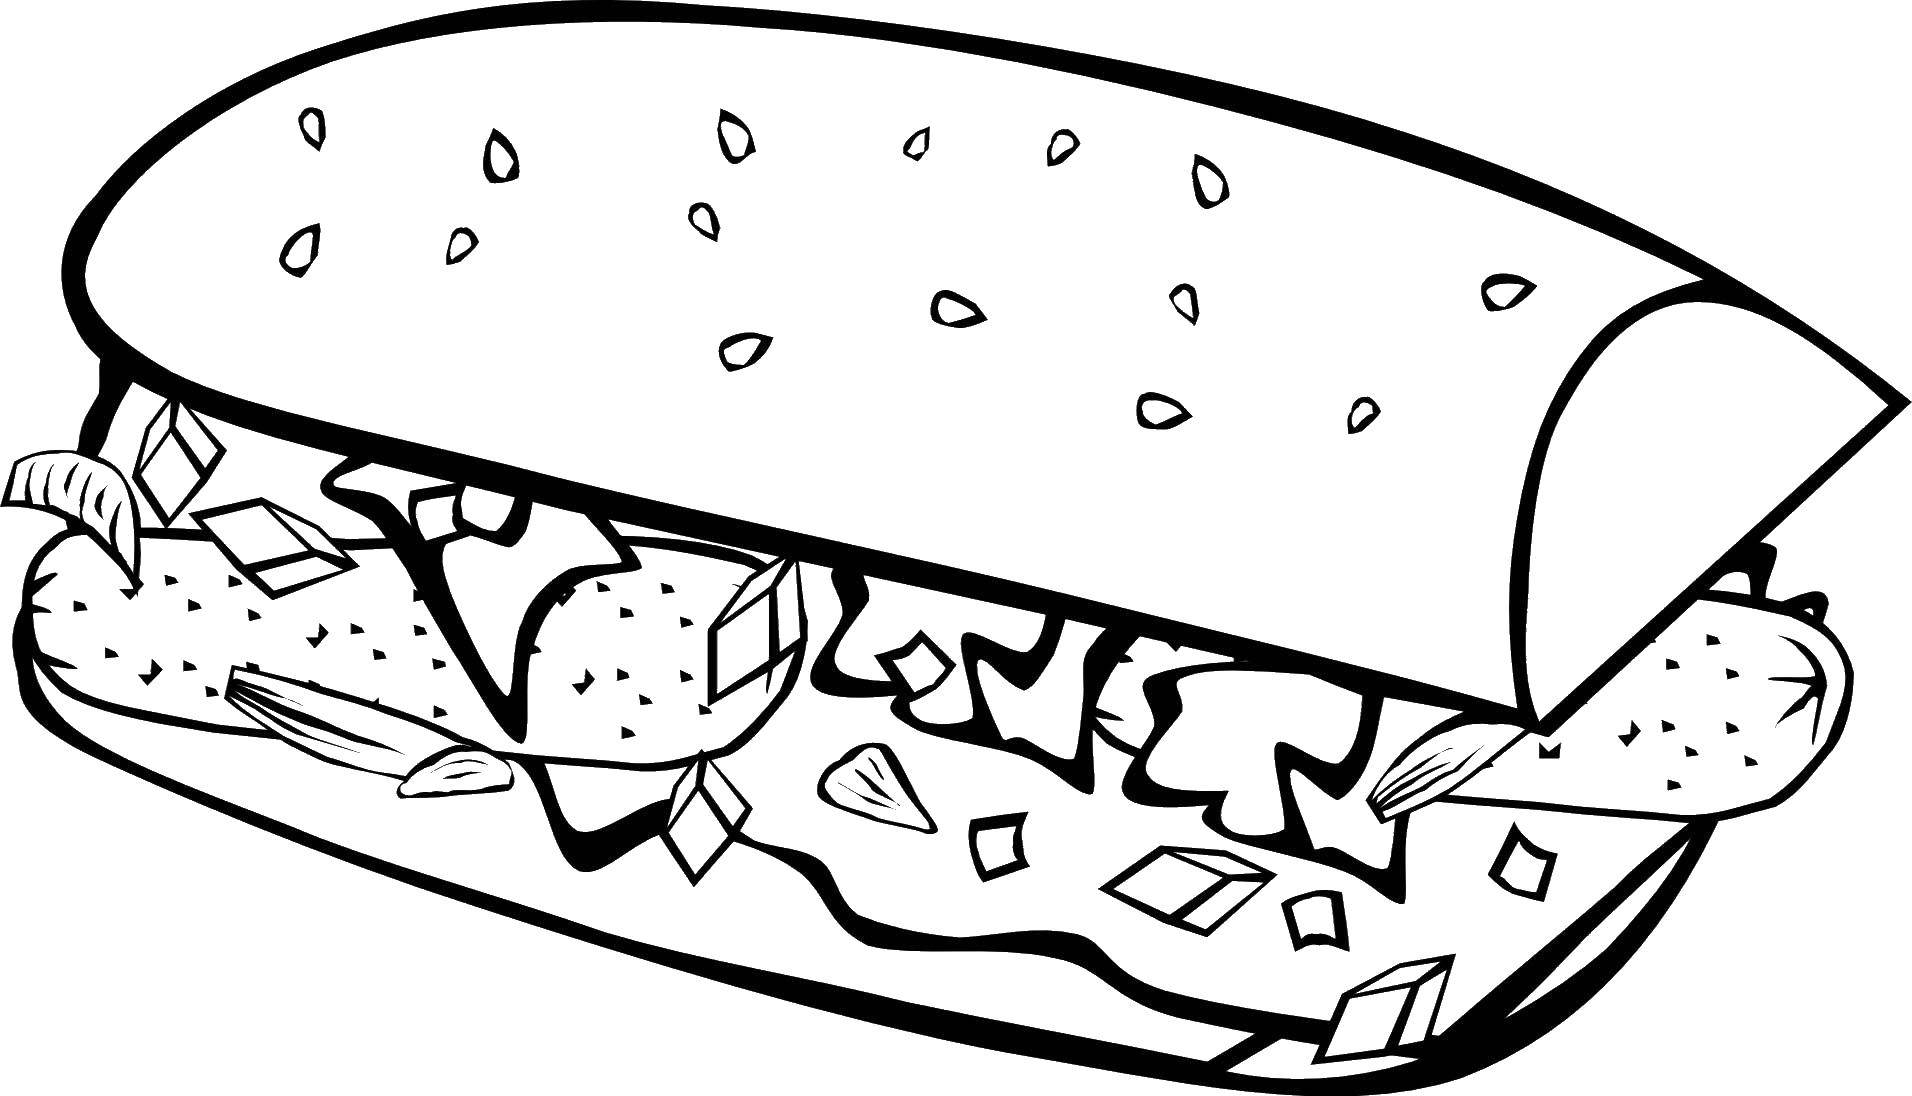 Coloring Sandwich. Category the food. Tags:  bread, sausage, stuffing.